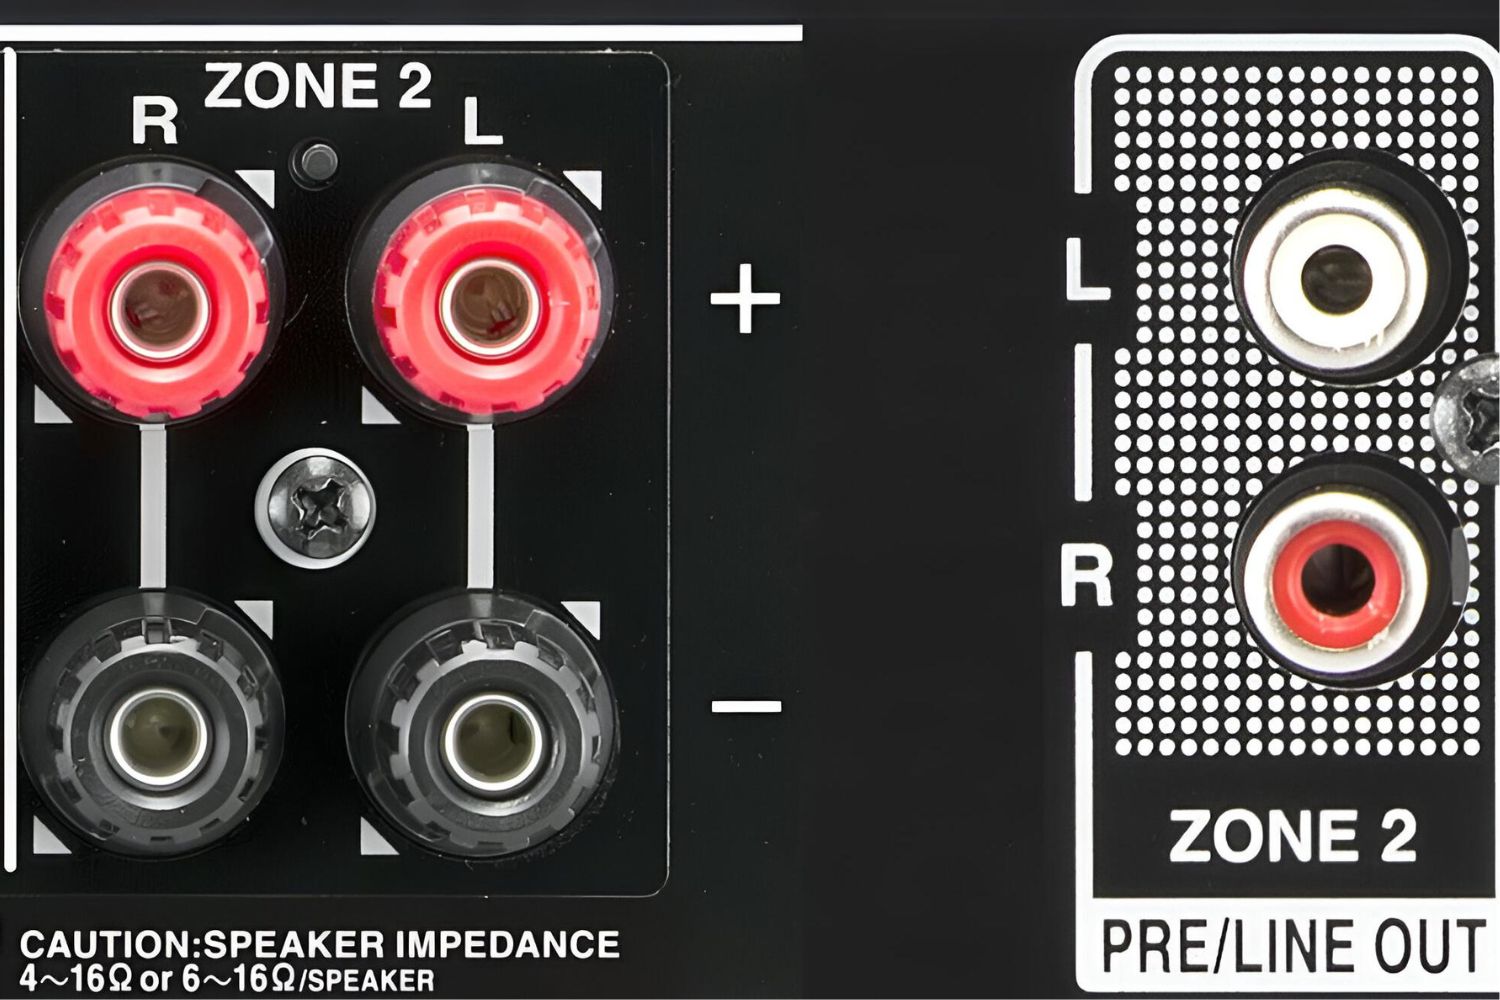 What Is Zone 2 On An AV Receiver